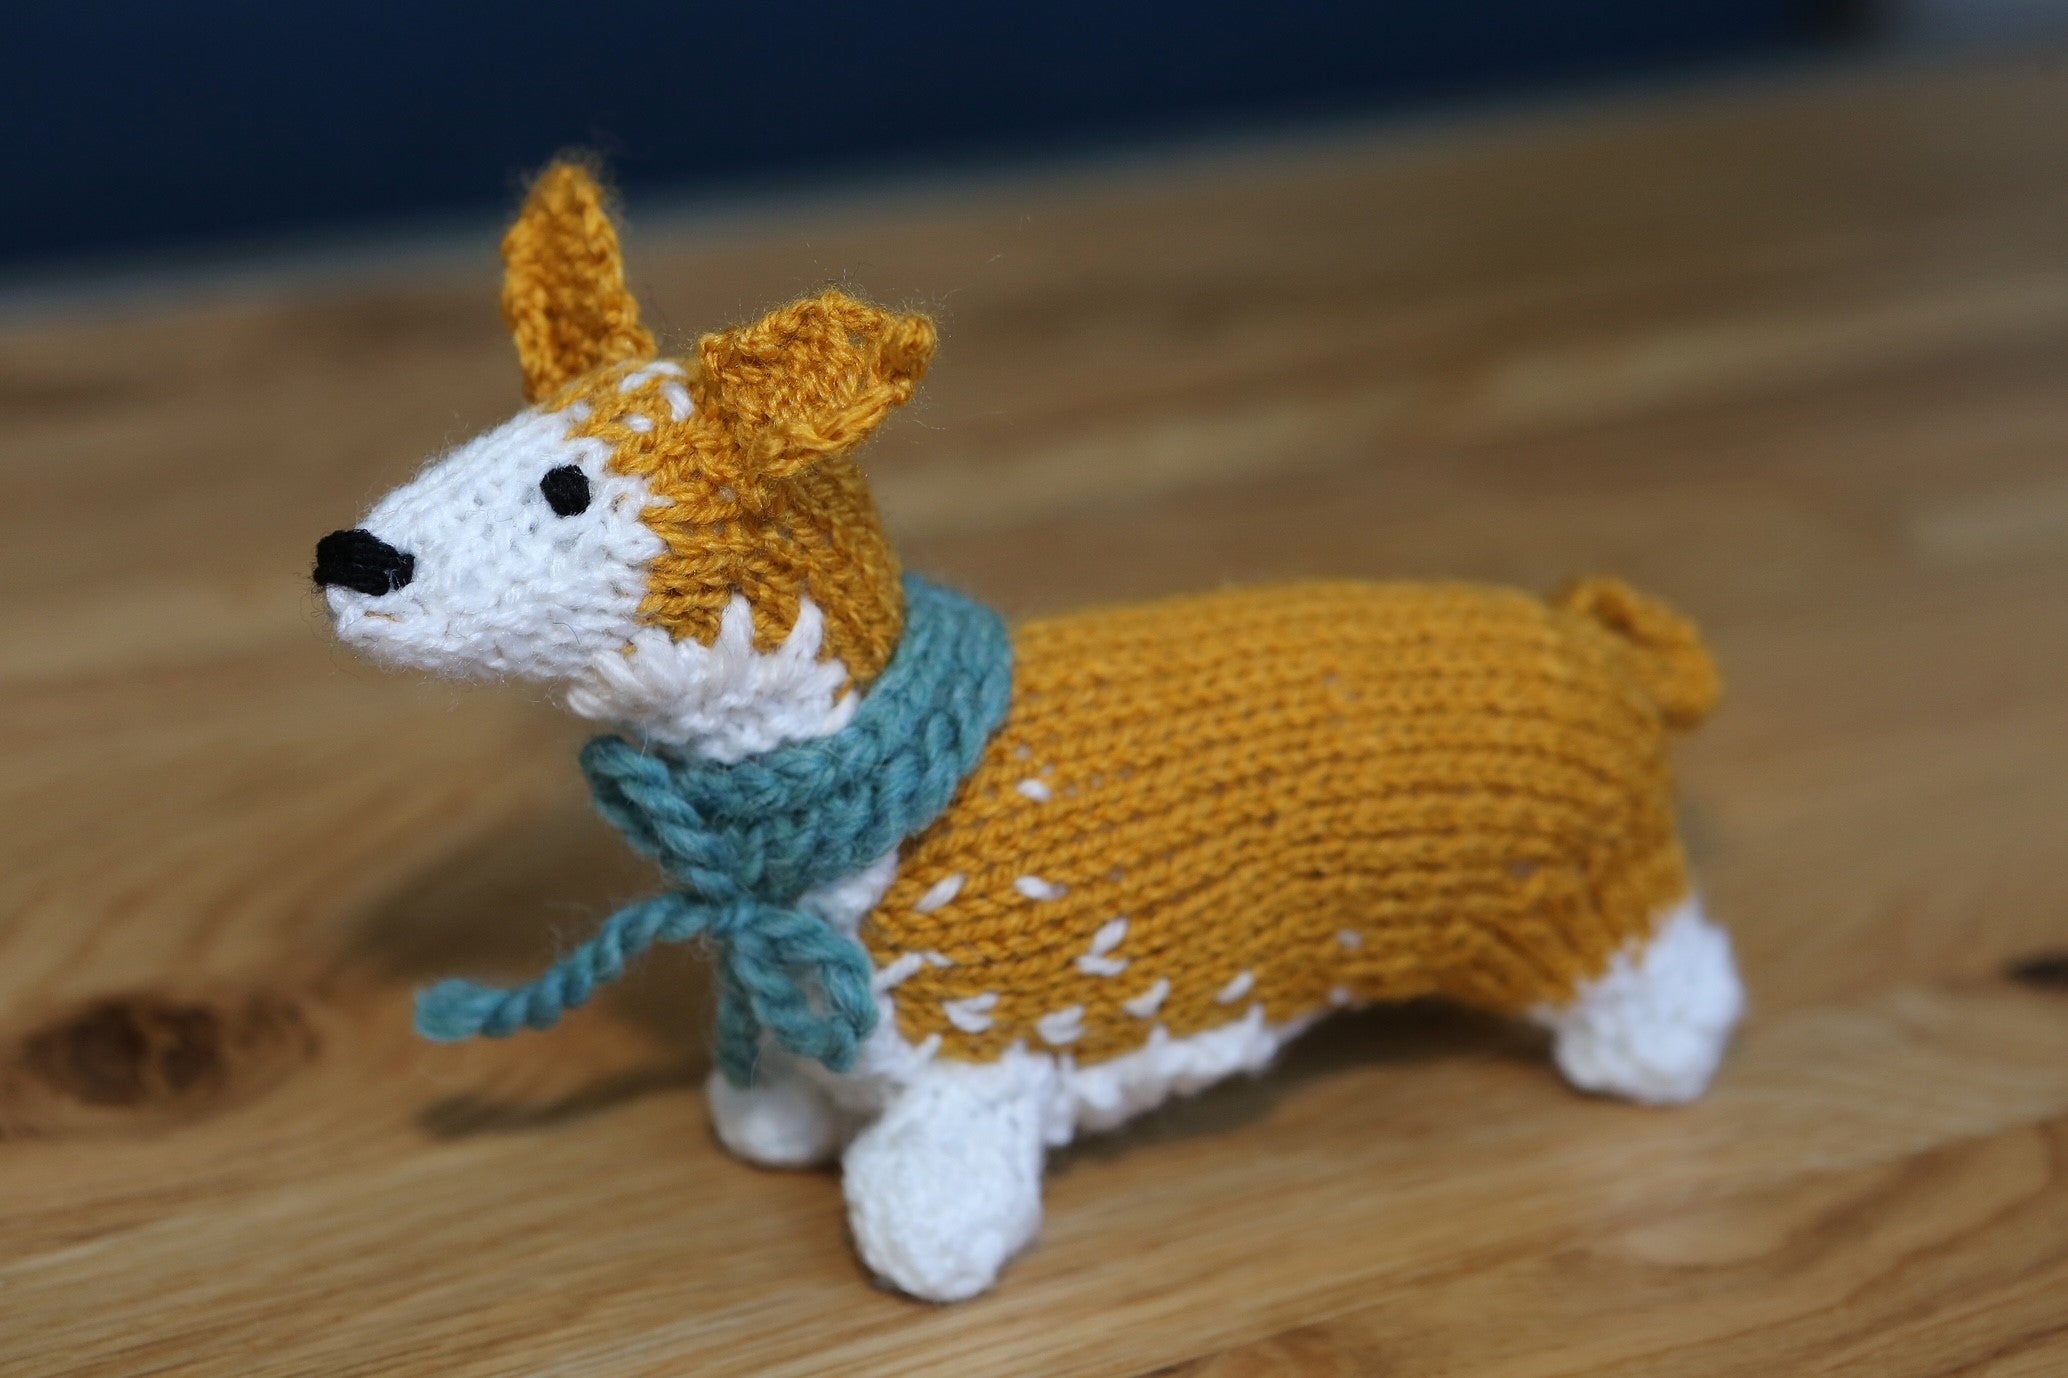 Knitted corgis will be hidden around the country